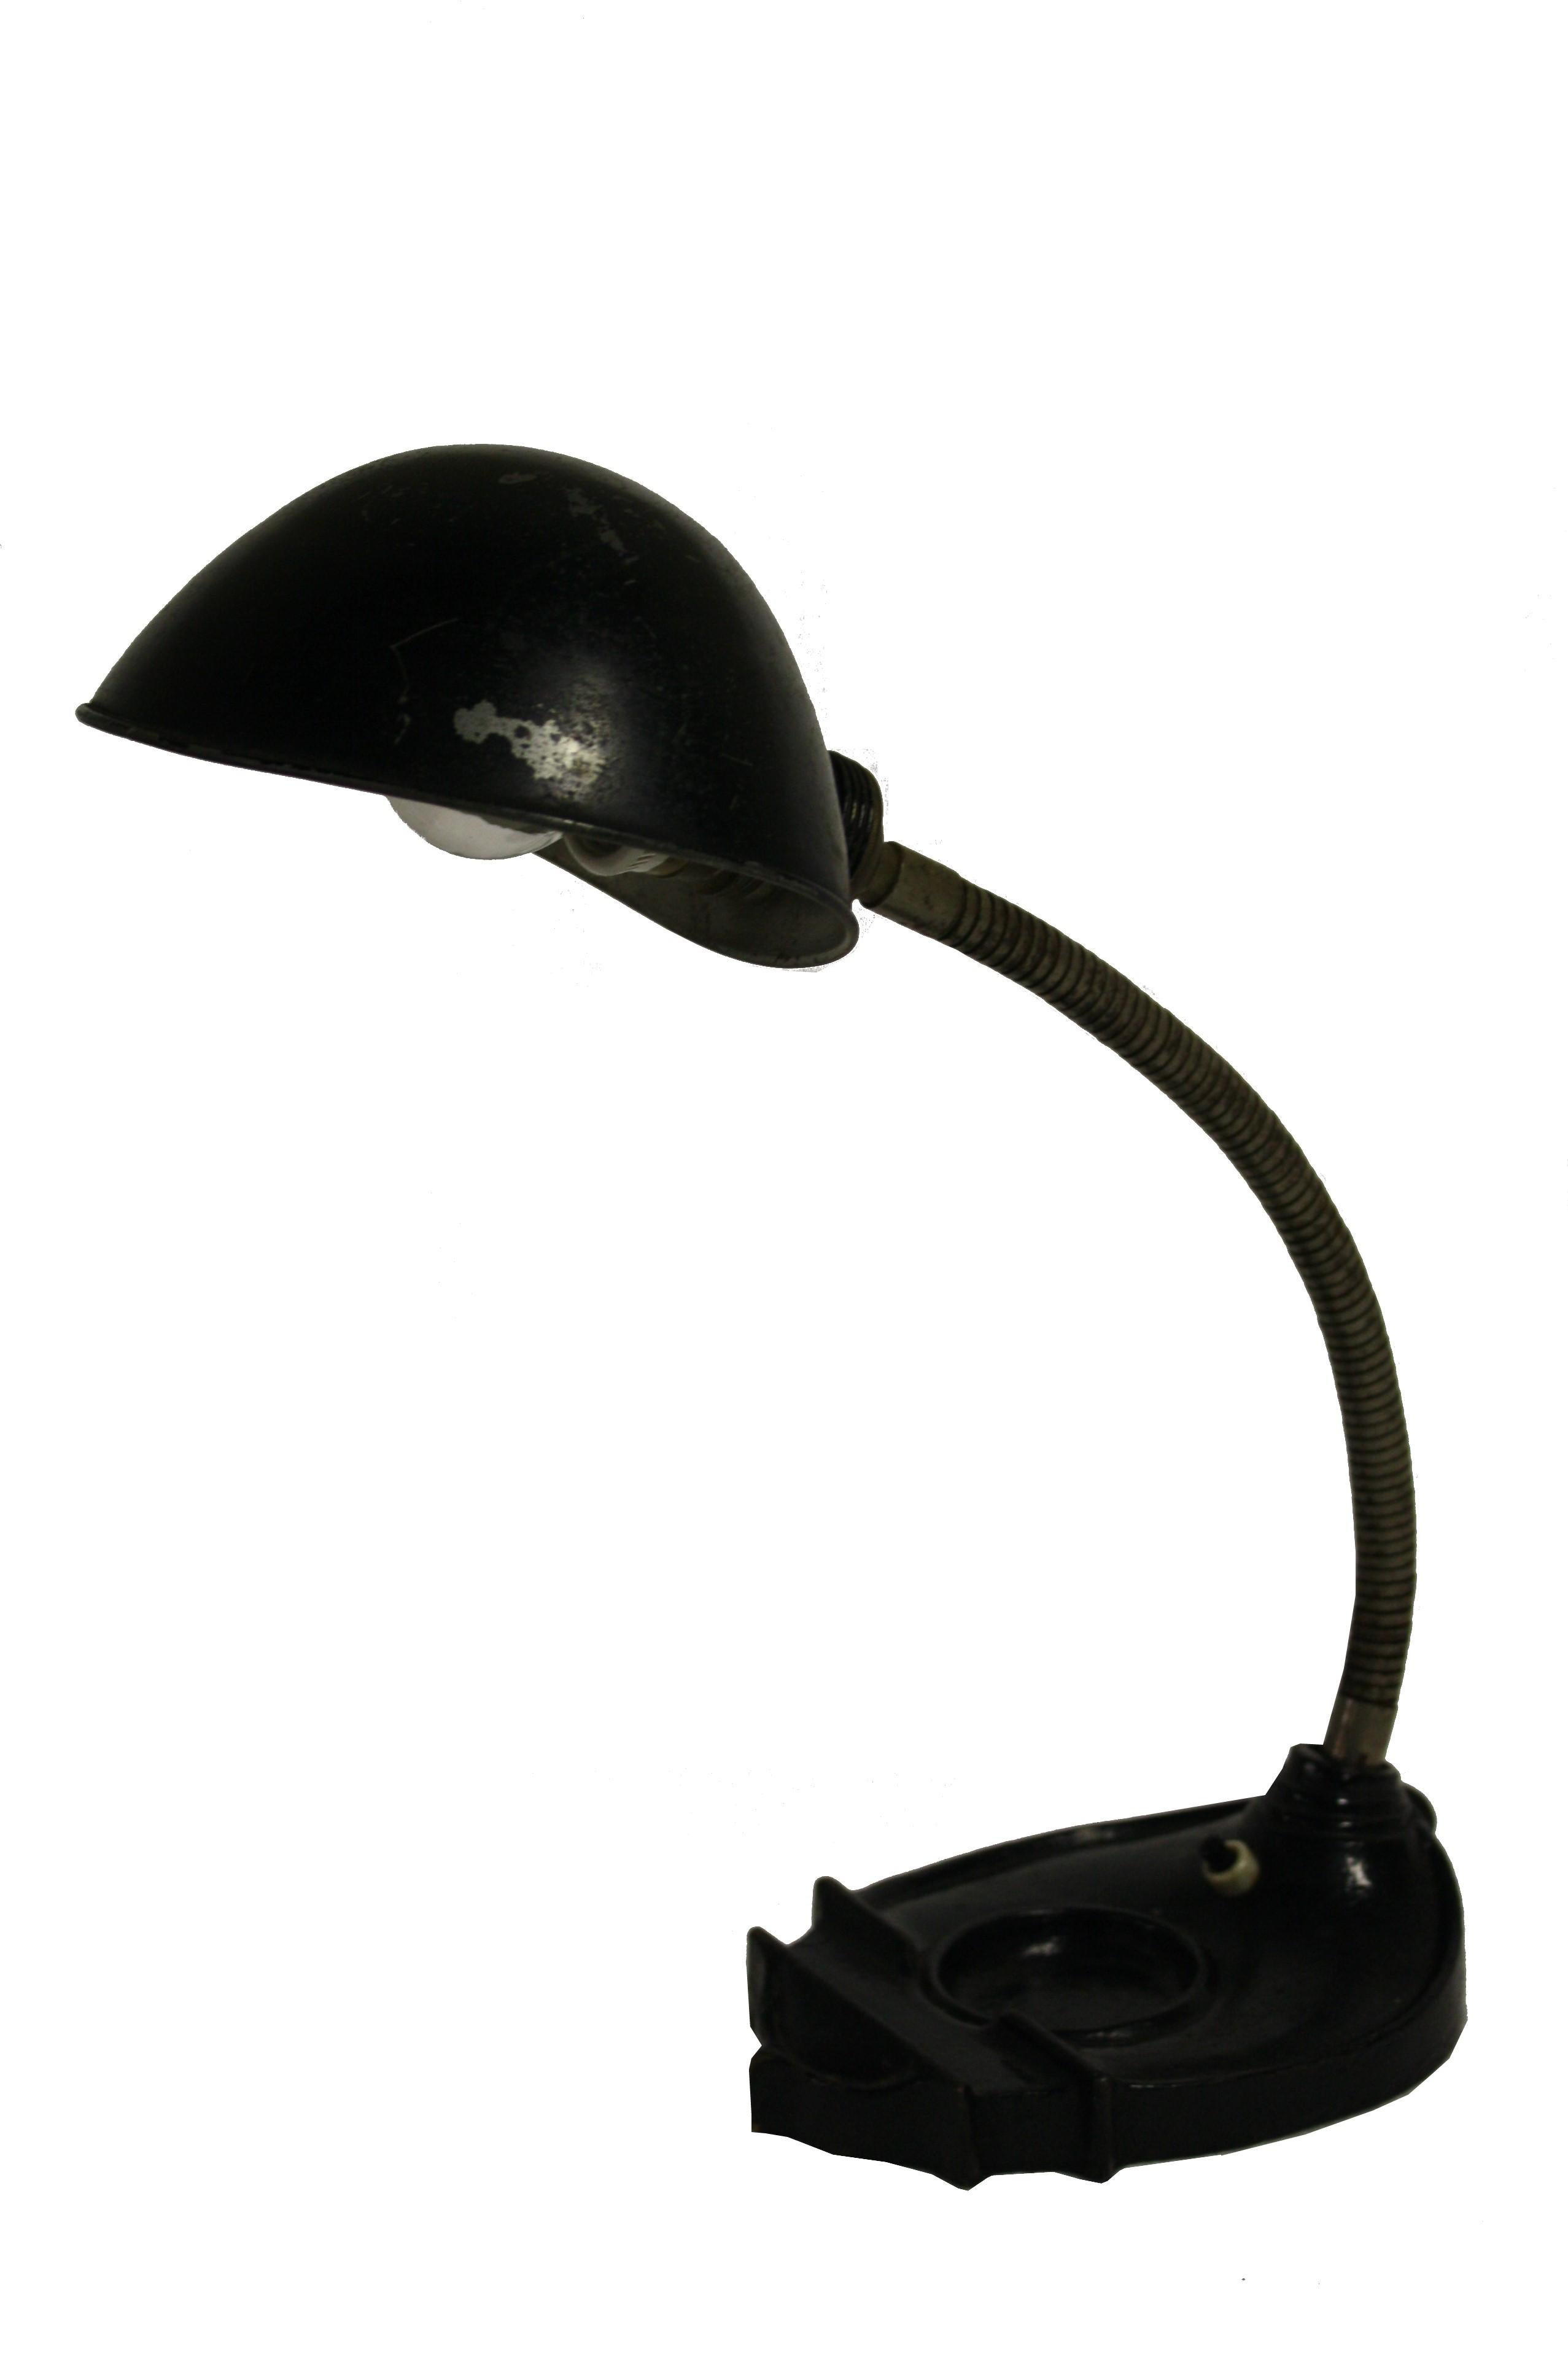 Art Deco gooseneck table lamp or work light by the Belgian company Erpe.

The lamp has an olive green colour with some patina on the base.

The light is adjustable thanks to a flexible arm and has a cast iron base.

Original 'Erpe' label is